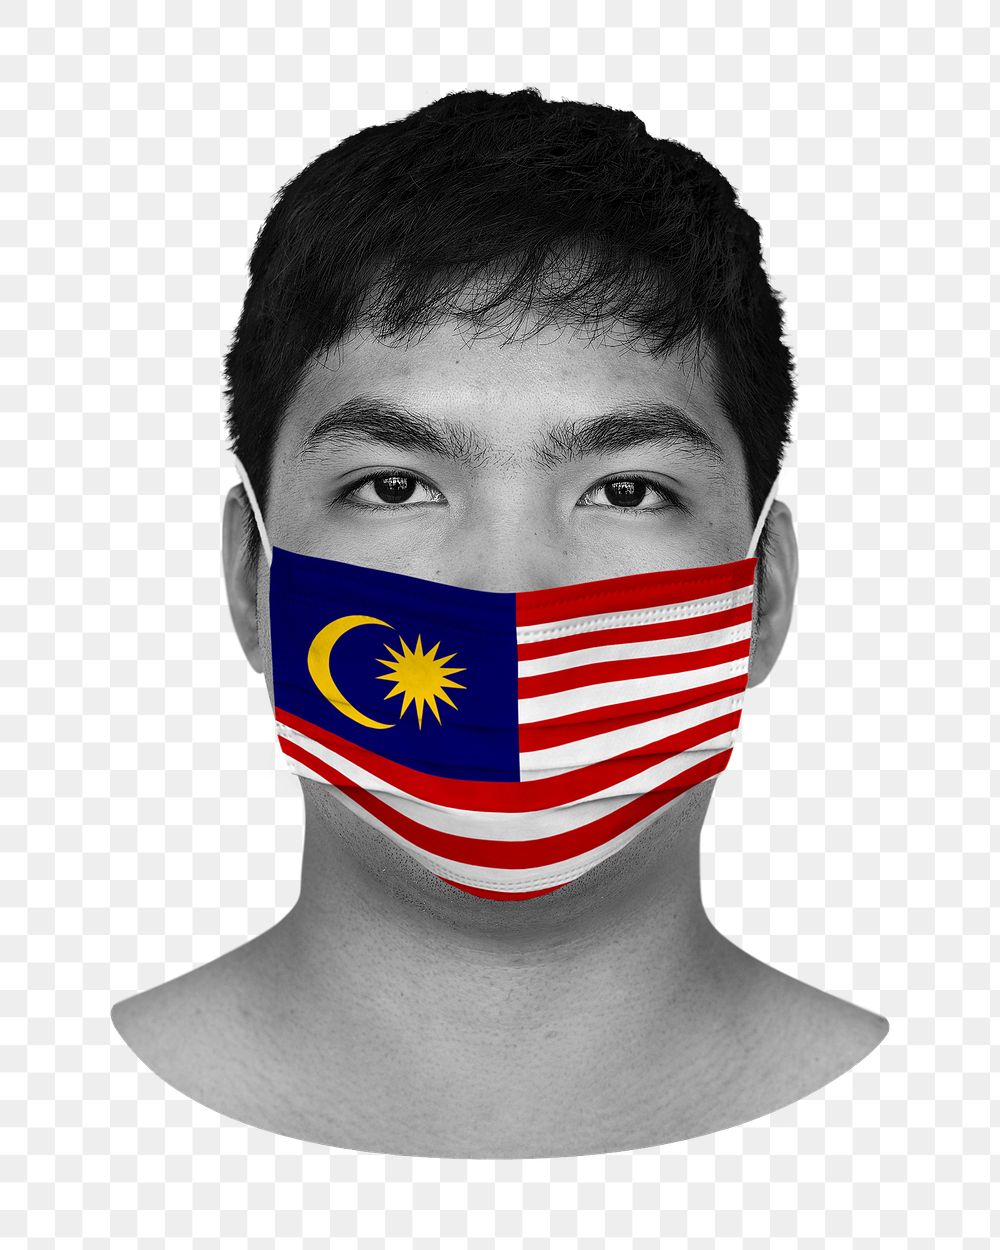 Malaysian man png, Covid-19 image on transparent background